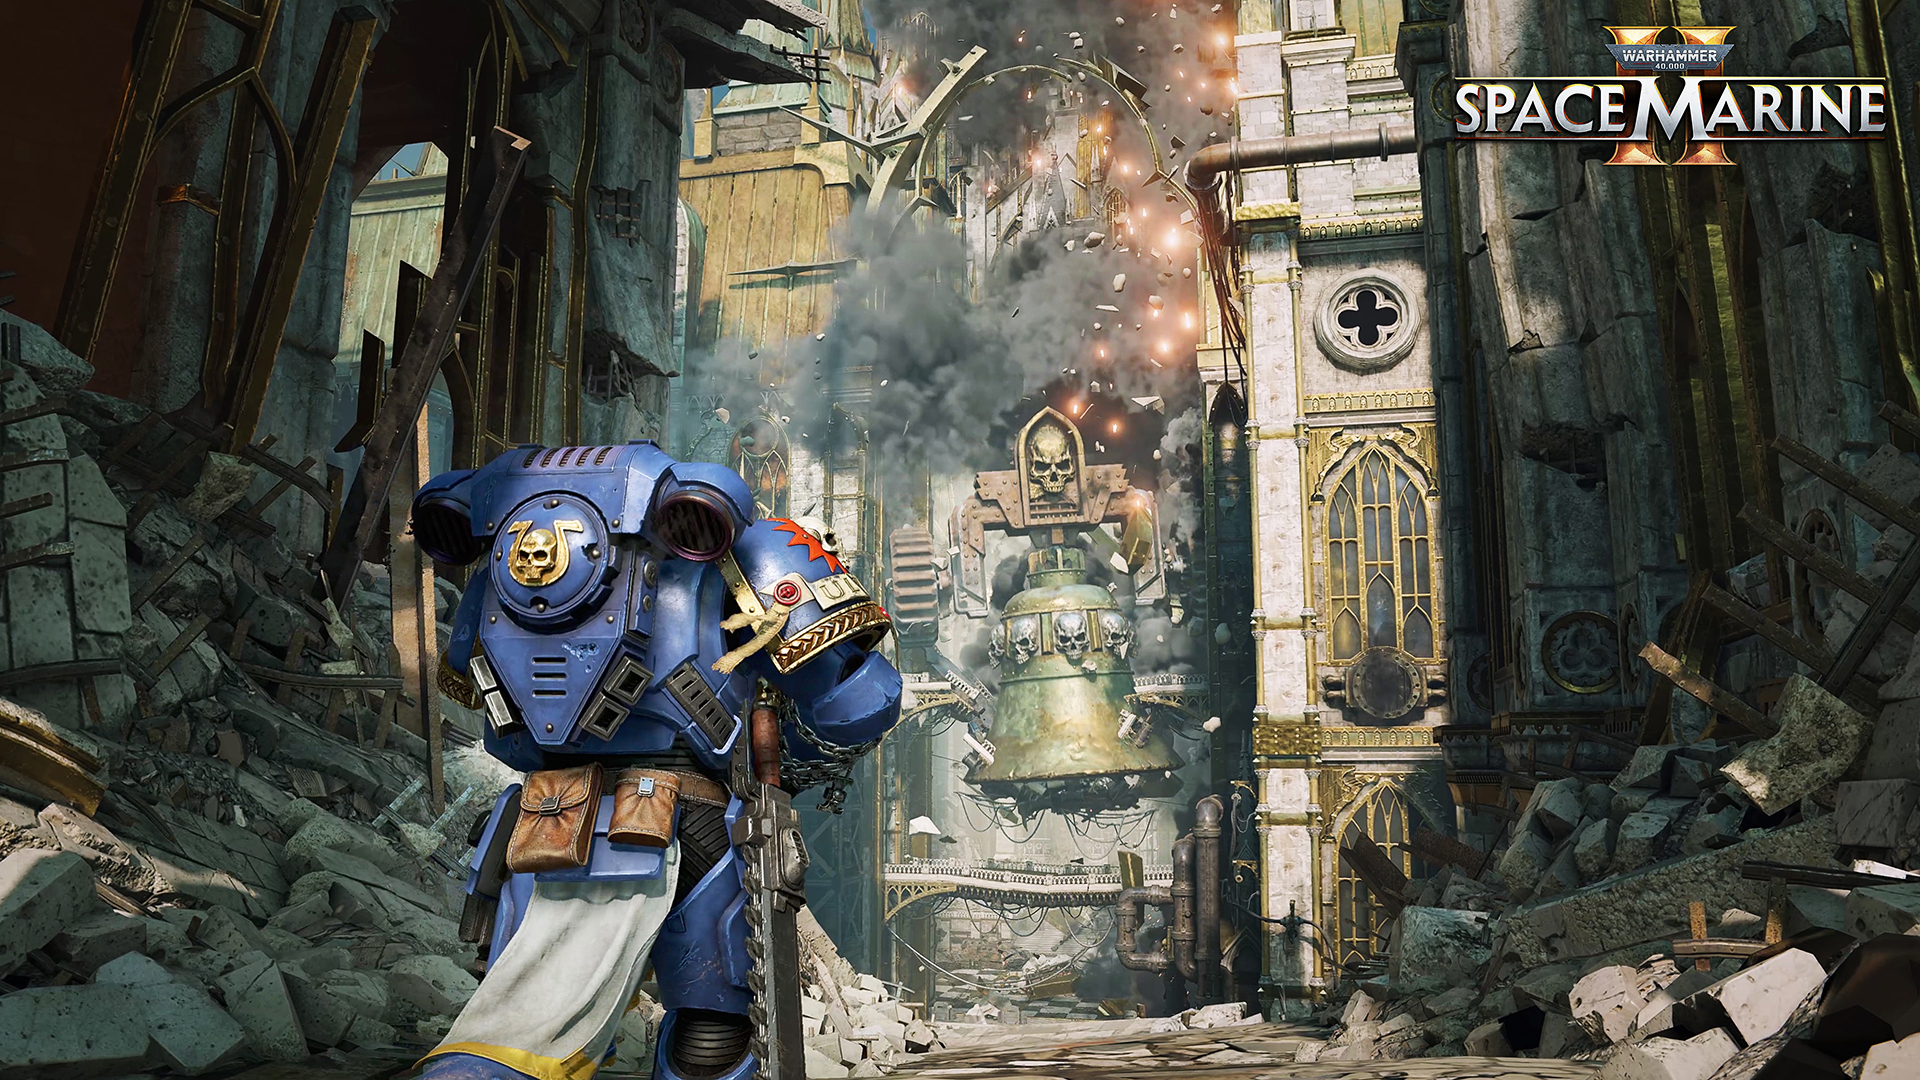 HD desktop wallpaper featuring a Space Marine from Warhammer 40K: Space Marine 2, standing amidst a battle-scarred gothic scenery.